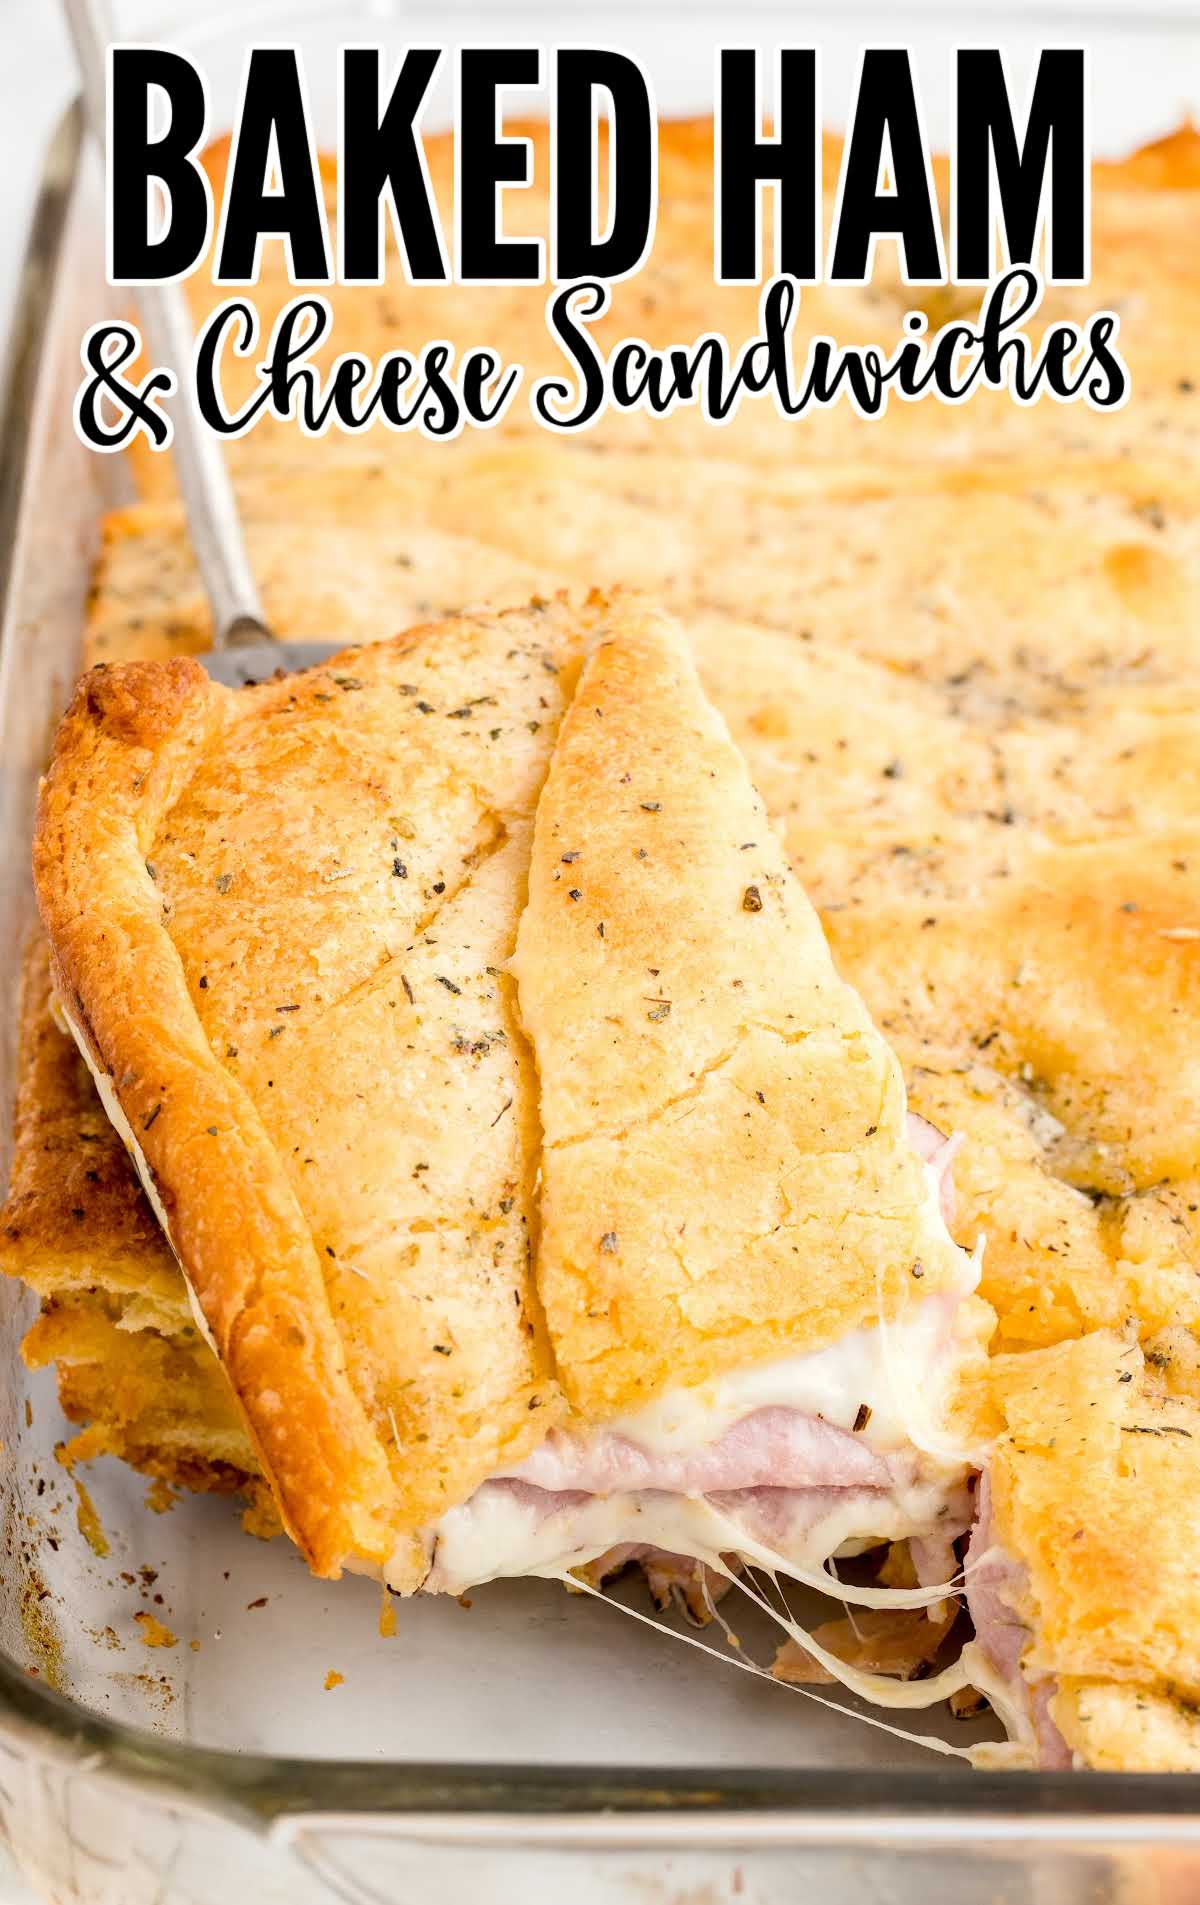 midler sejle retort Baked Ham and Cheese Sandwiches - The Best Blog Recipes